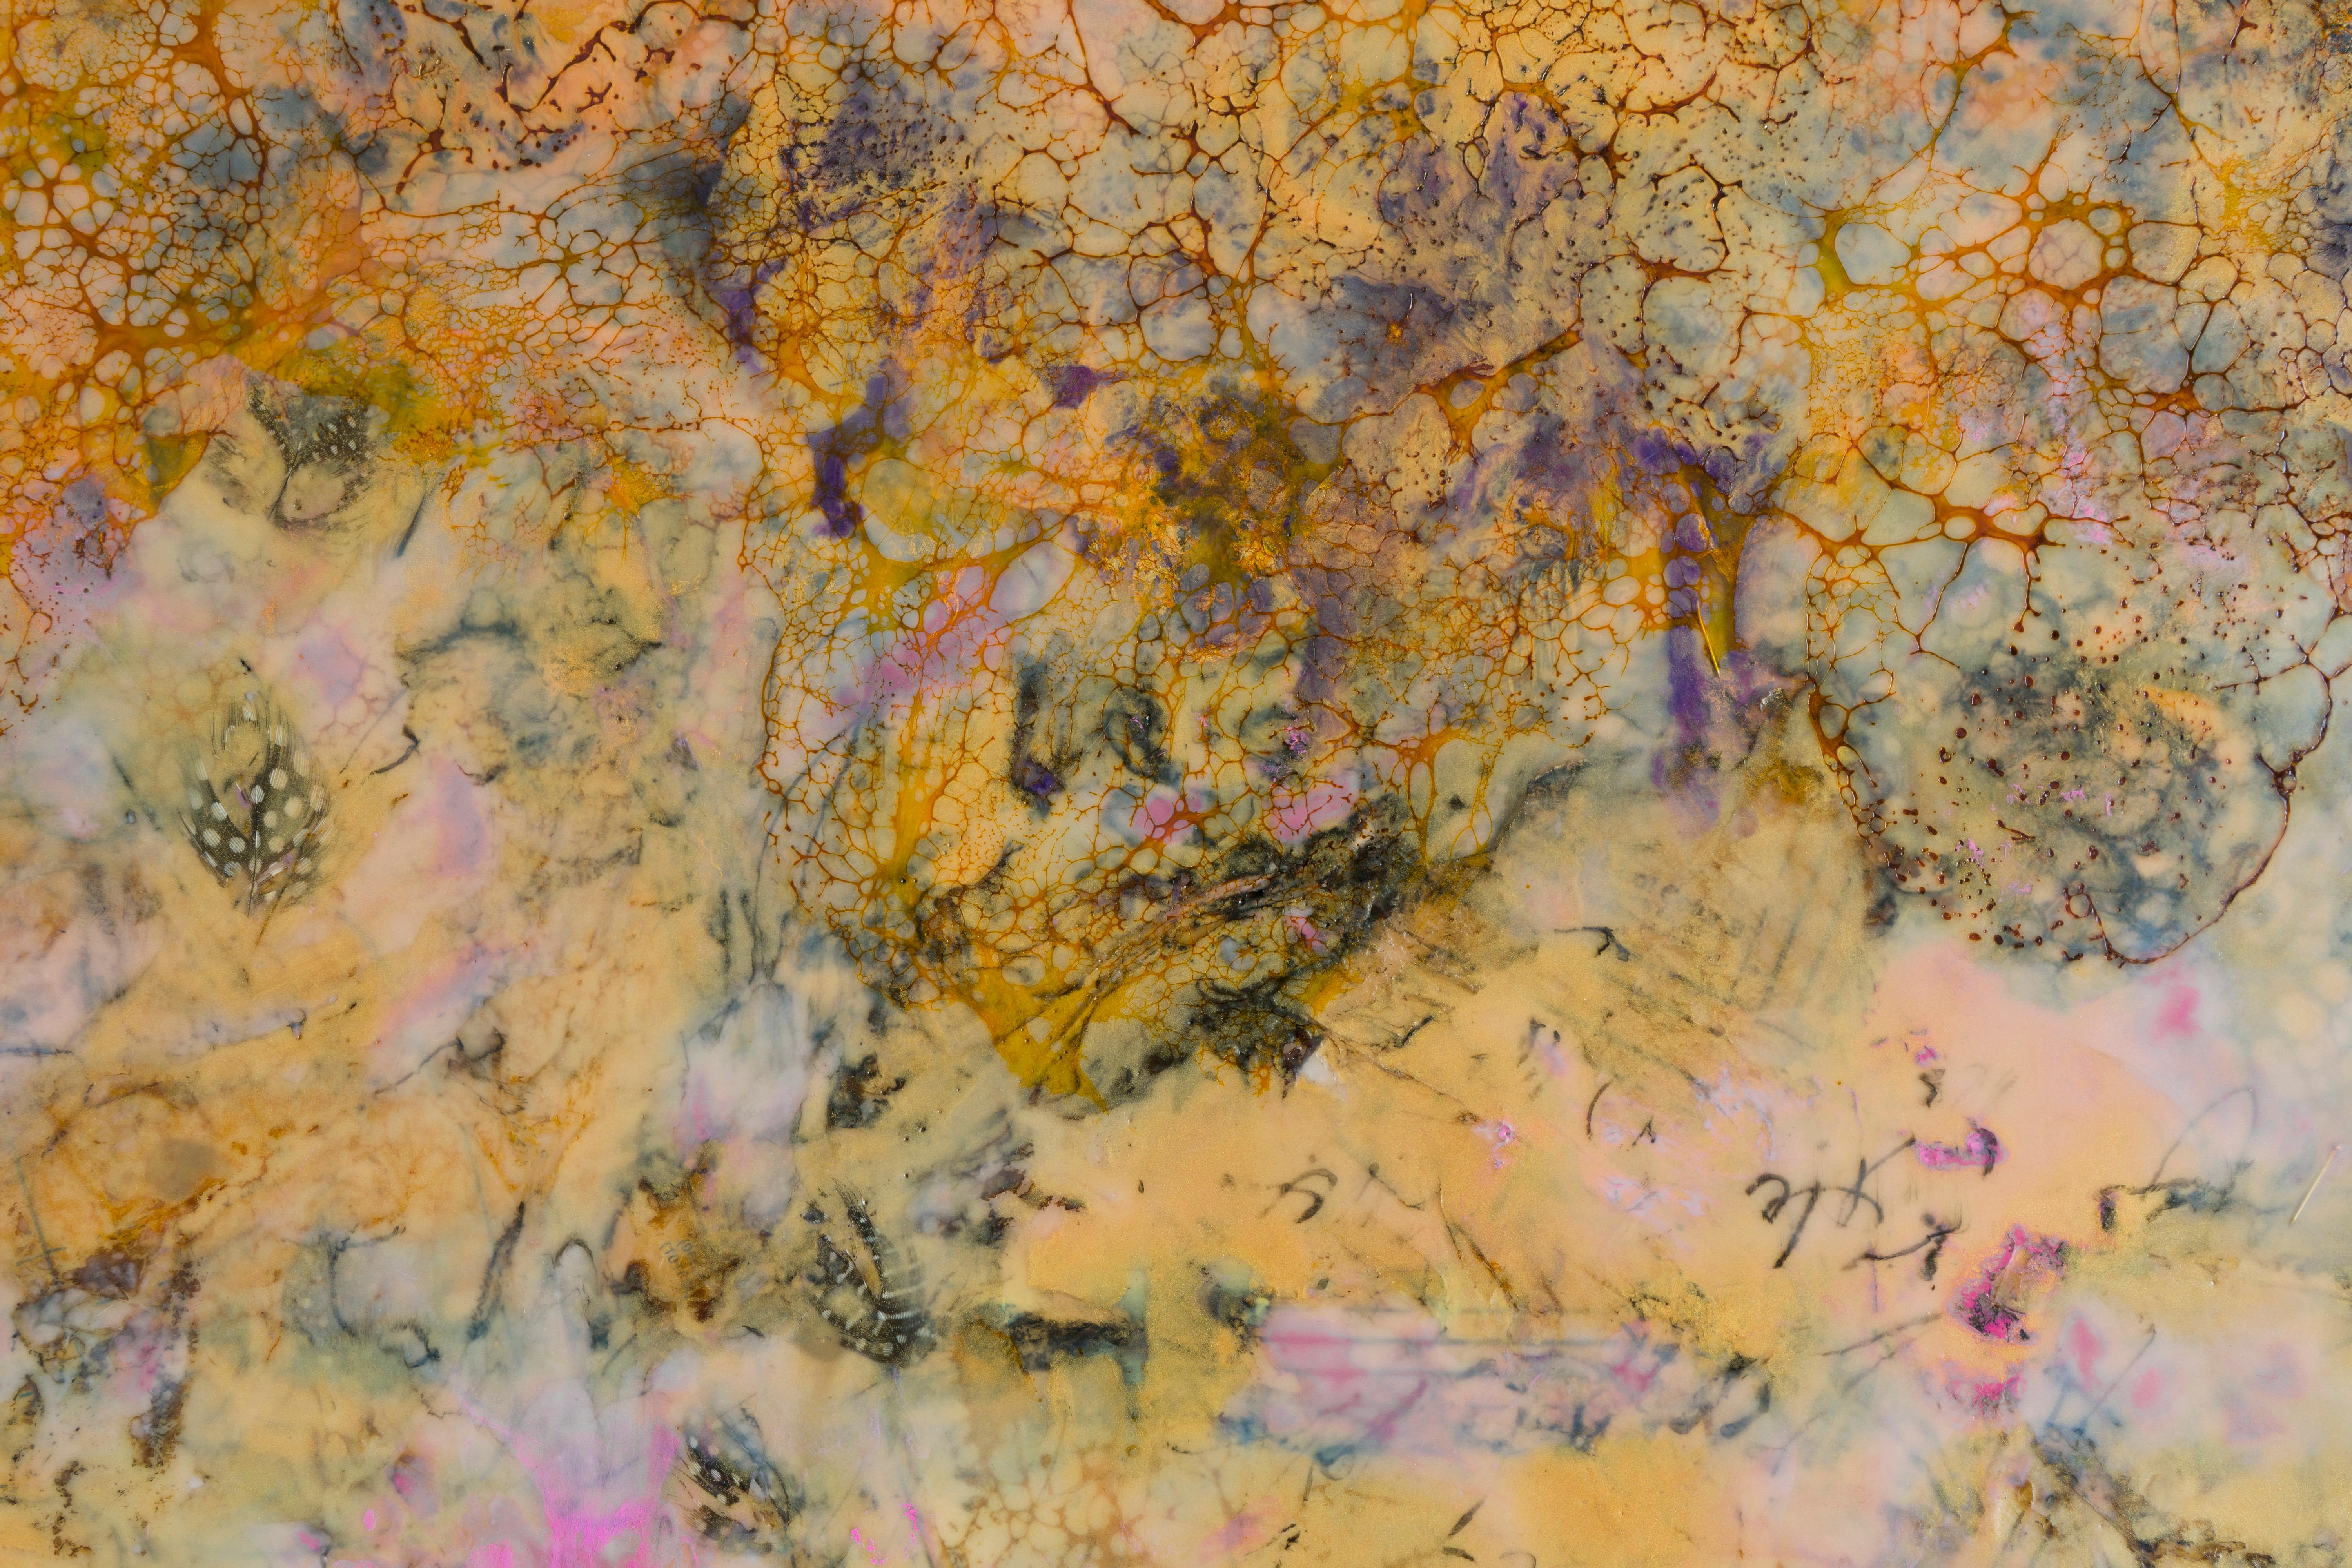 A large horizontal encaustic abstract painting in beautiful yellow, pink, and teal hues by Pamela Gibson. This gorgeous painting brightens the room with its vibrant array of colors and textures, rendered with the unique glean of beeswax. Hidden